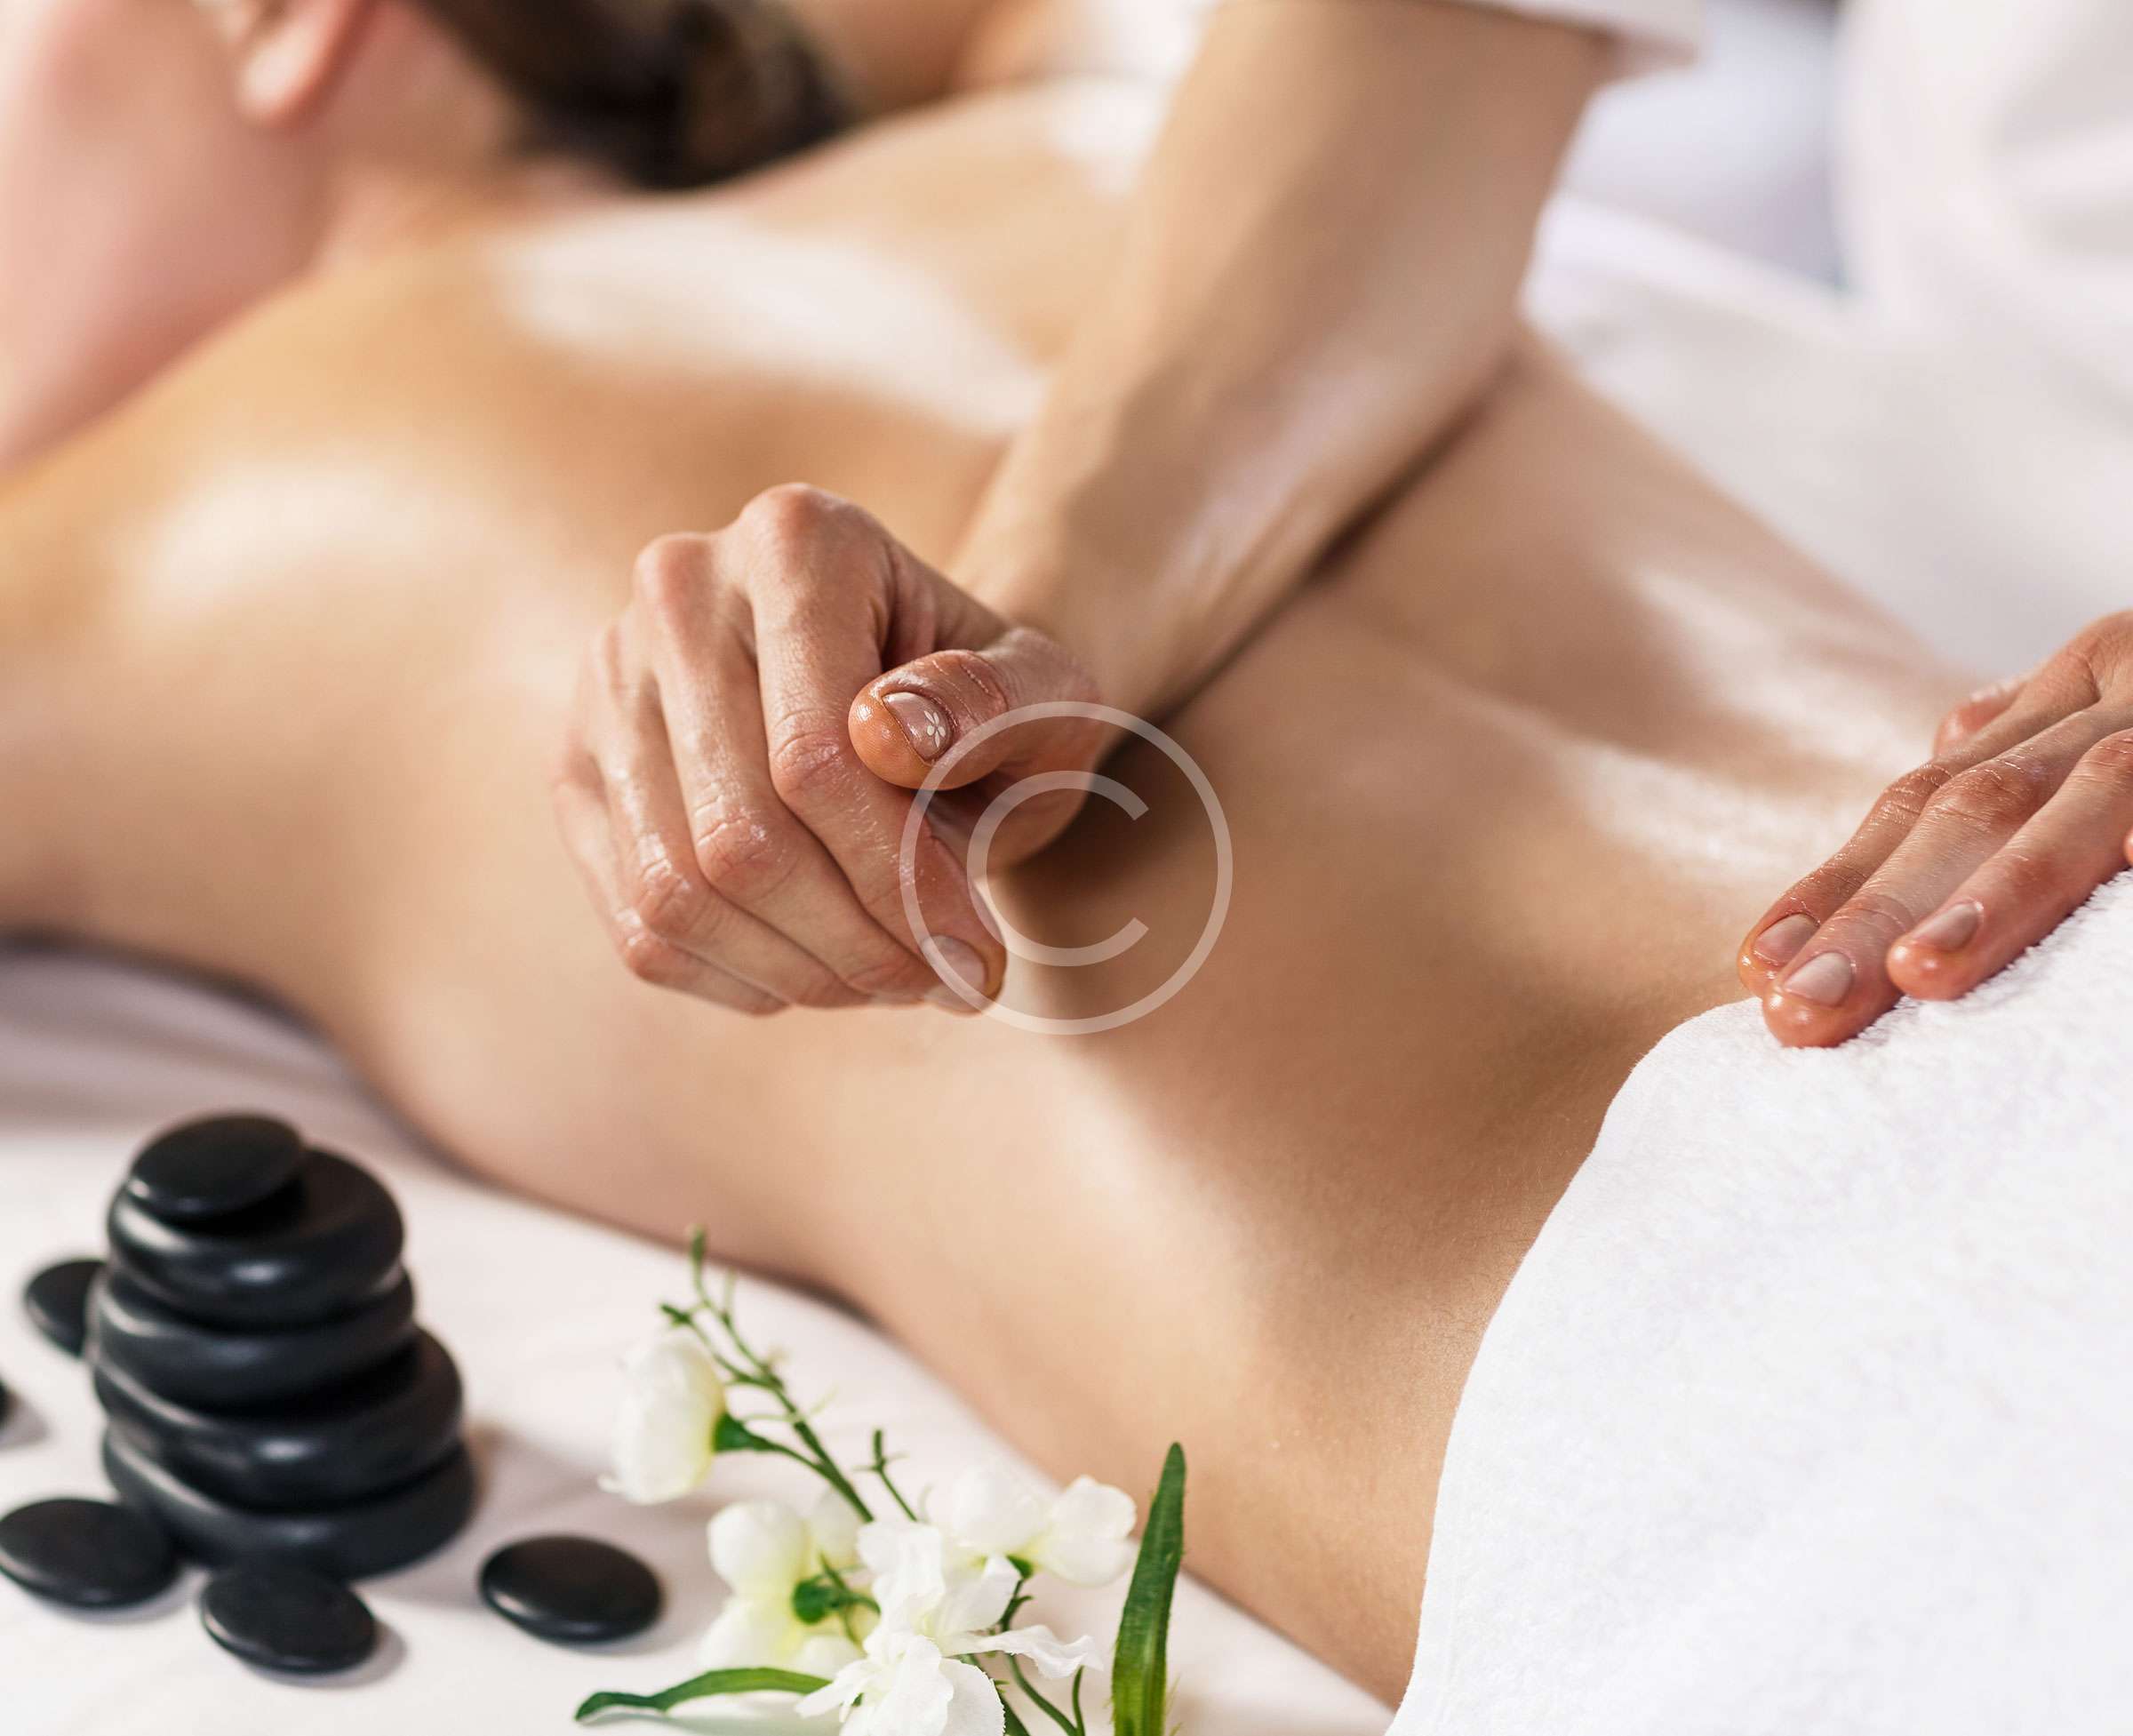 Therapeutic Massage & Bodywork Eugene OR. Deep tissue, hot stone, sports  massage. — The Pearl Day Spa